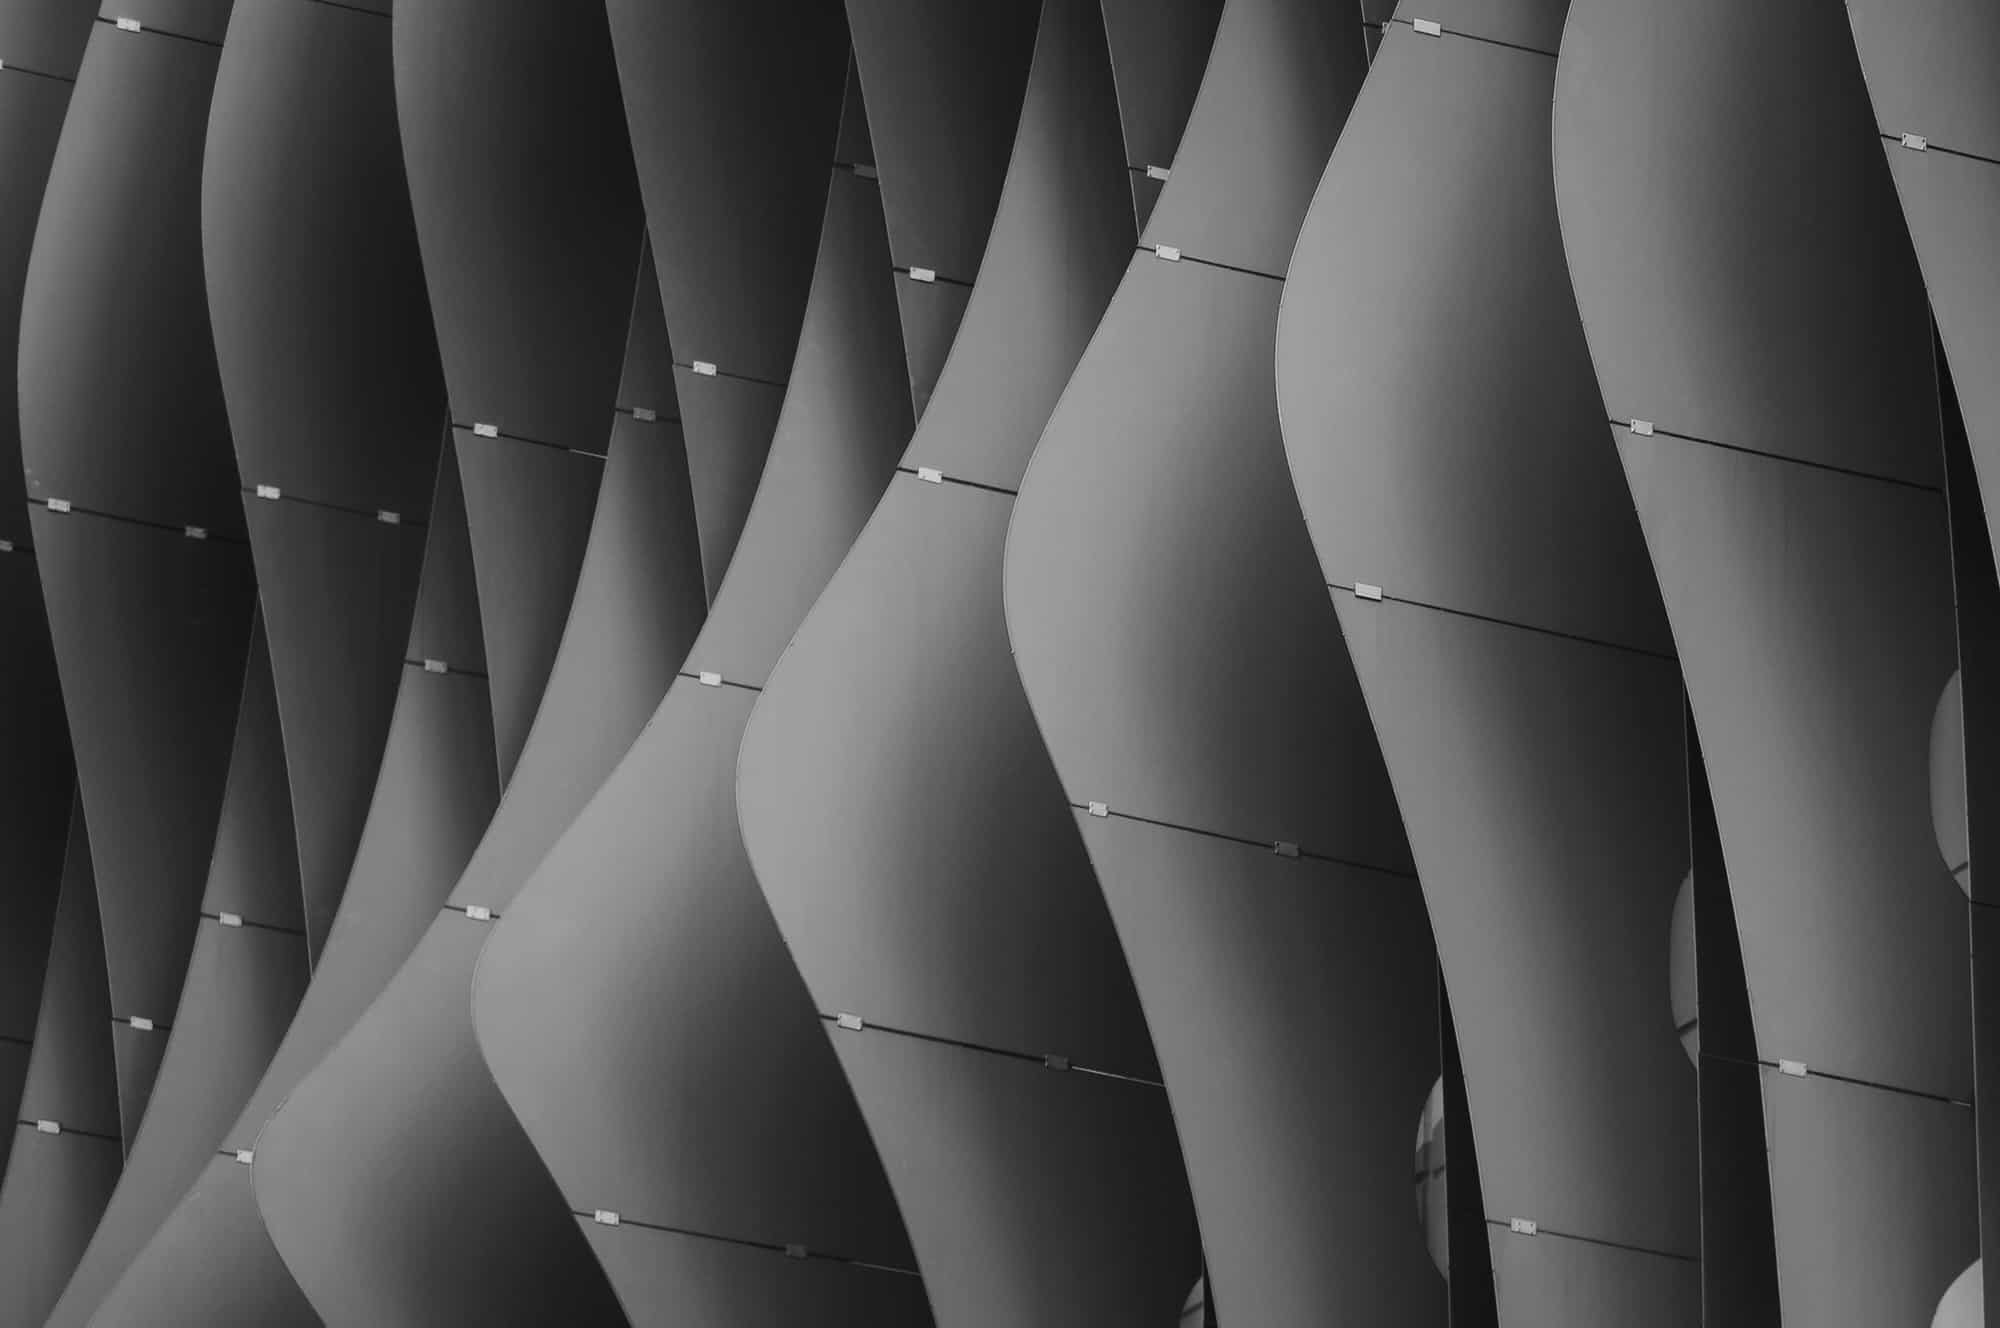 Repetitive curved metal panels in a monochromatic pattern.